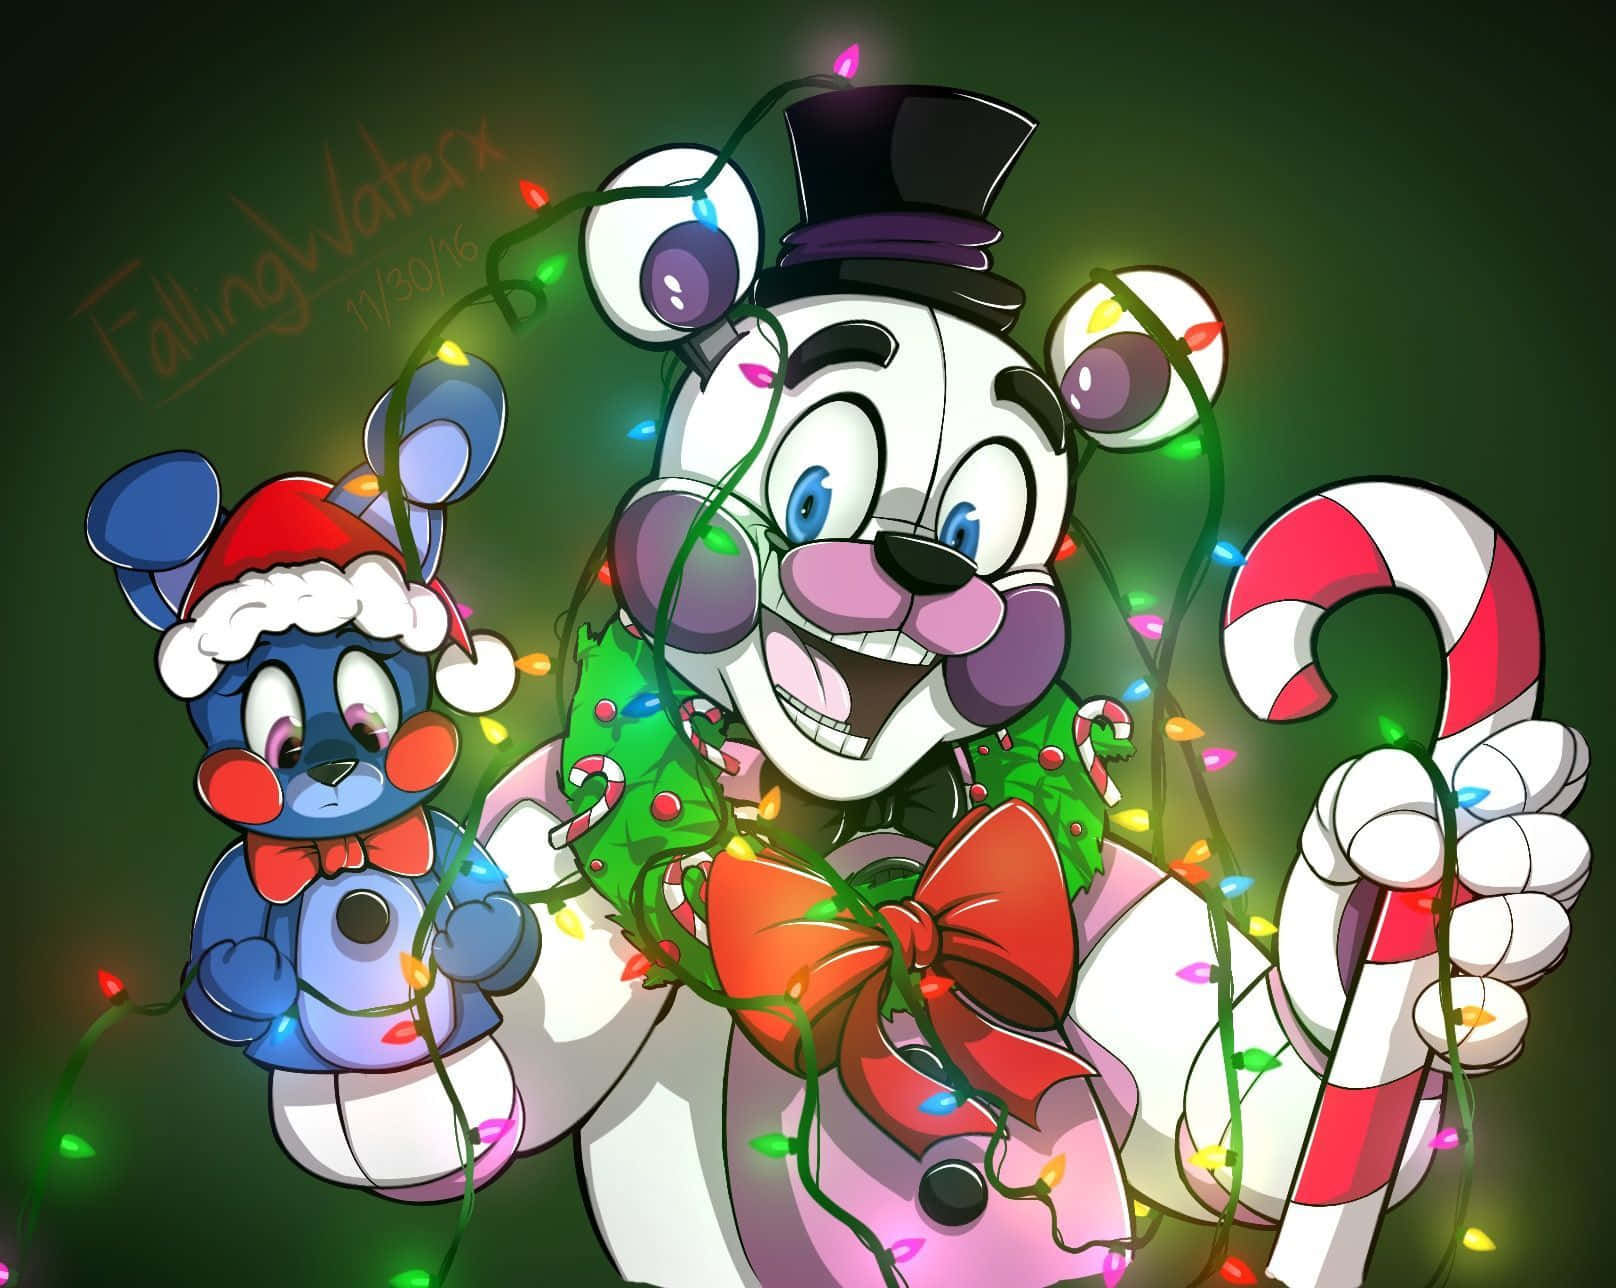 "Bring on the smiles with this adorable Cute FNAF character!" Wallpaper